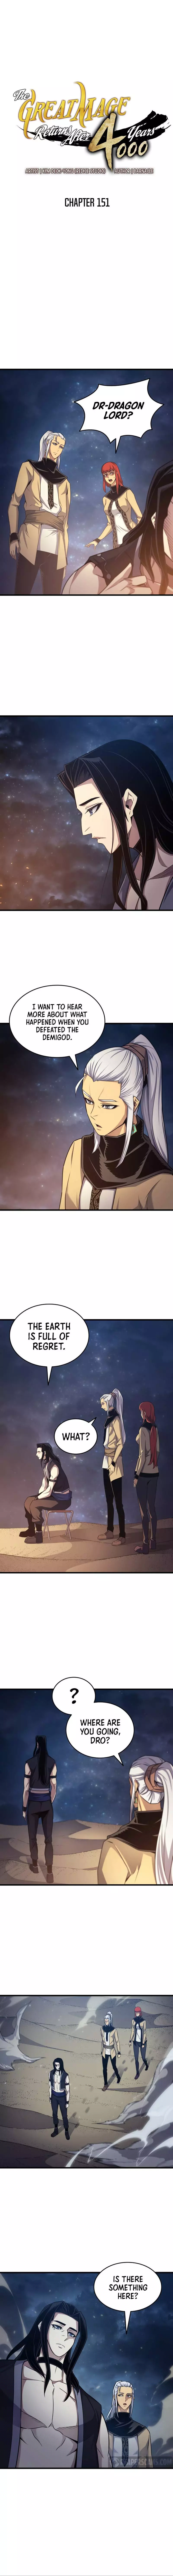 The Great Mage Returns After 4000 Years - 151 page 2-06b8e1de